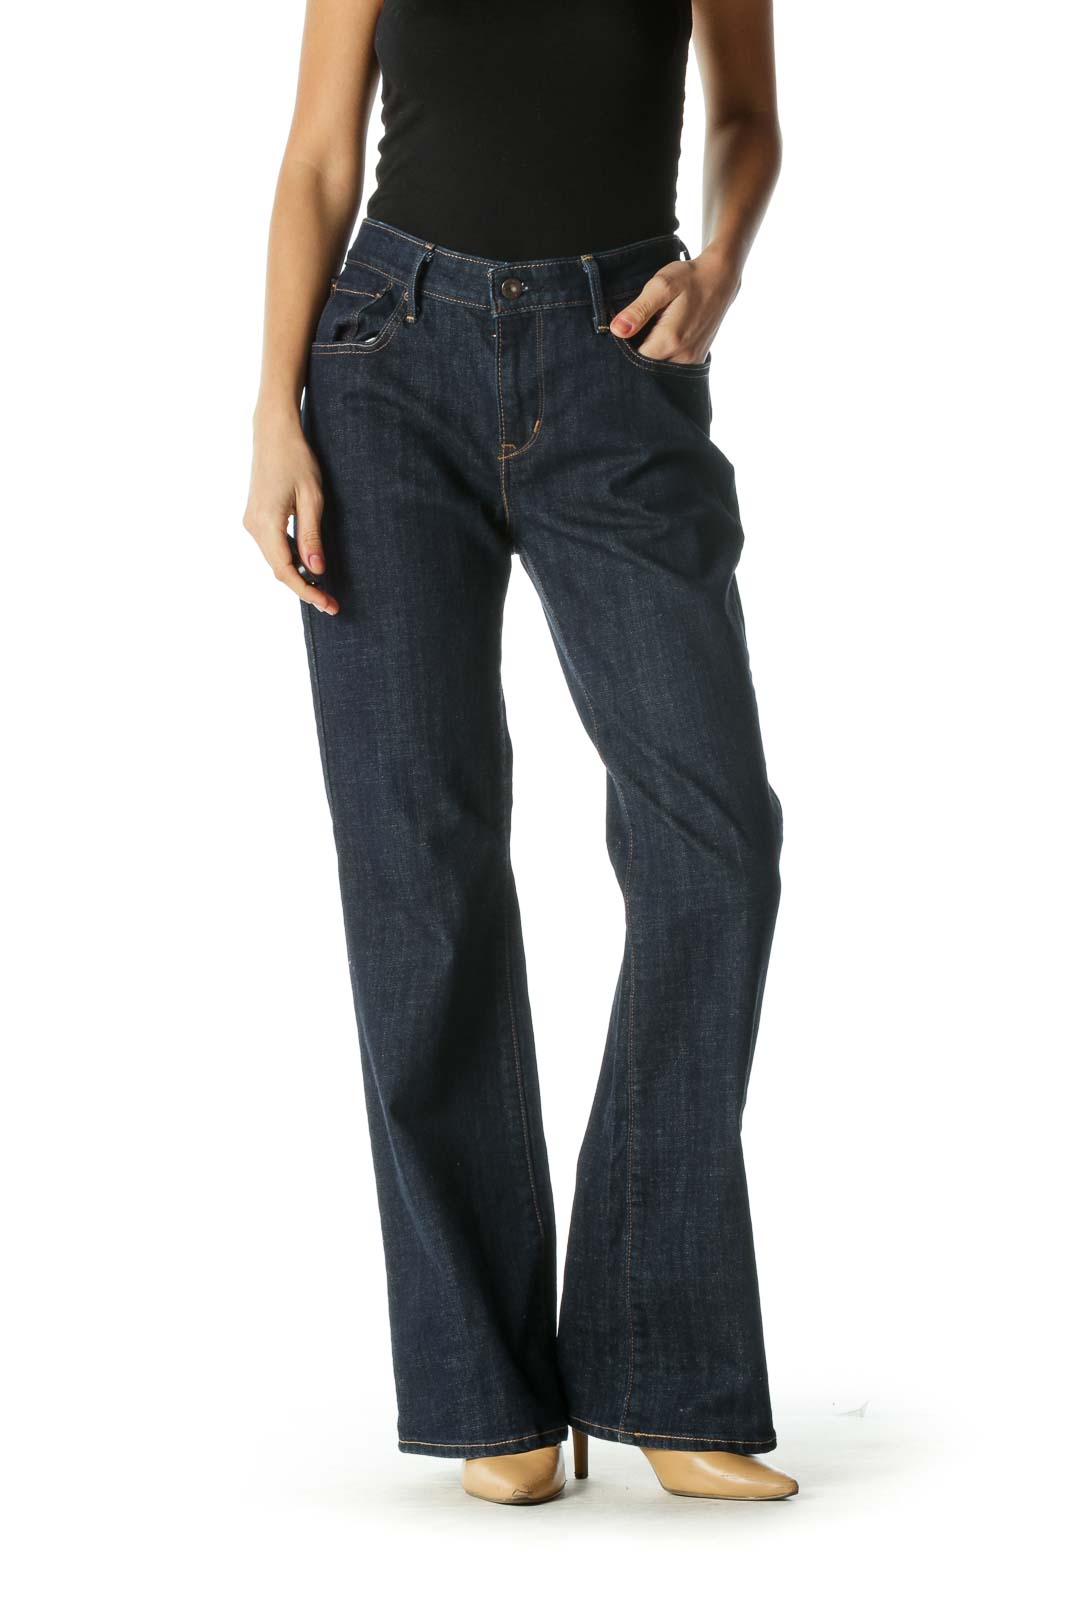 Blue Dark Wash Wide Boot Cut Jeans Front